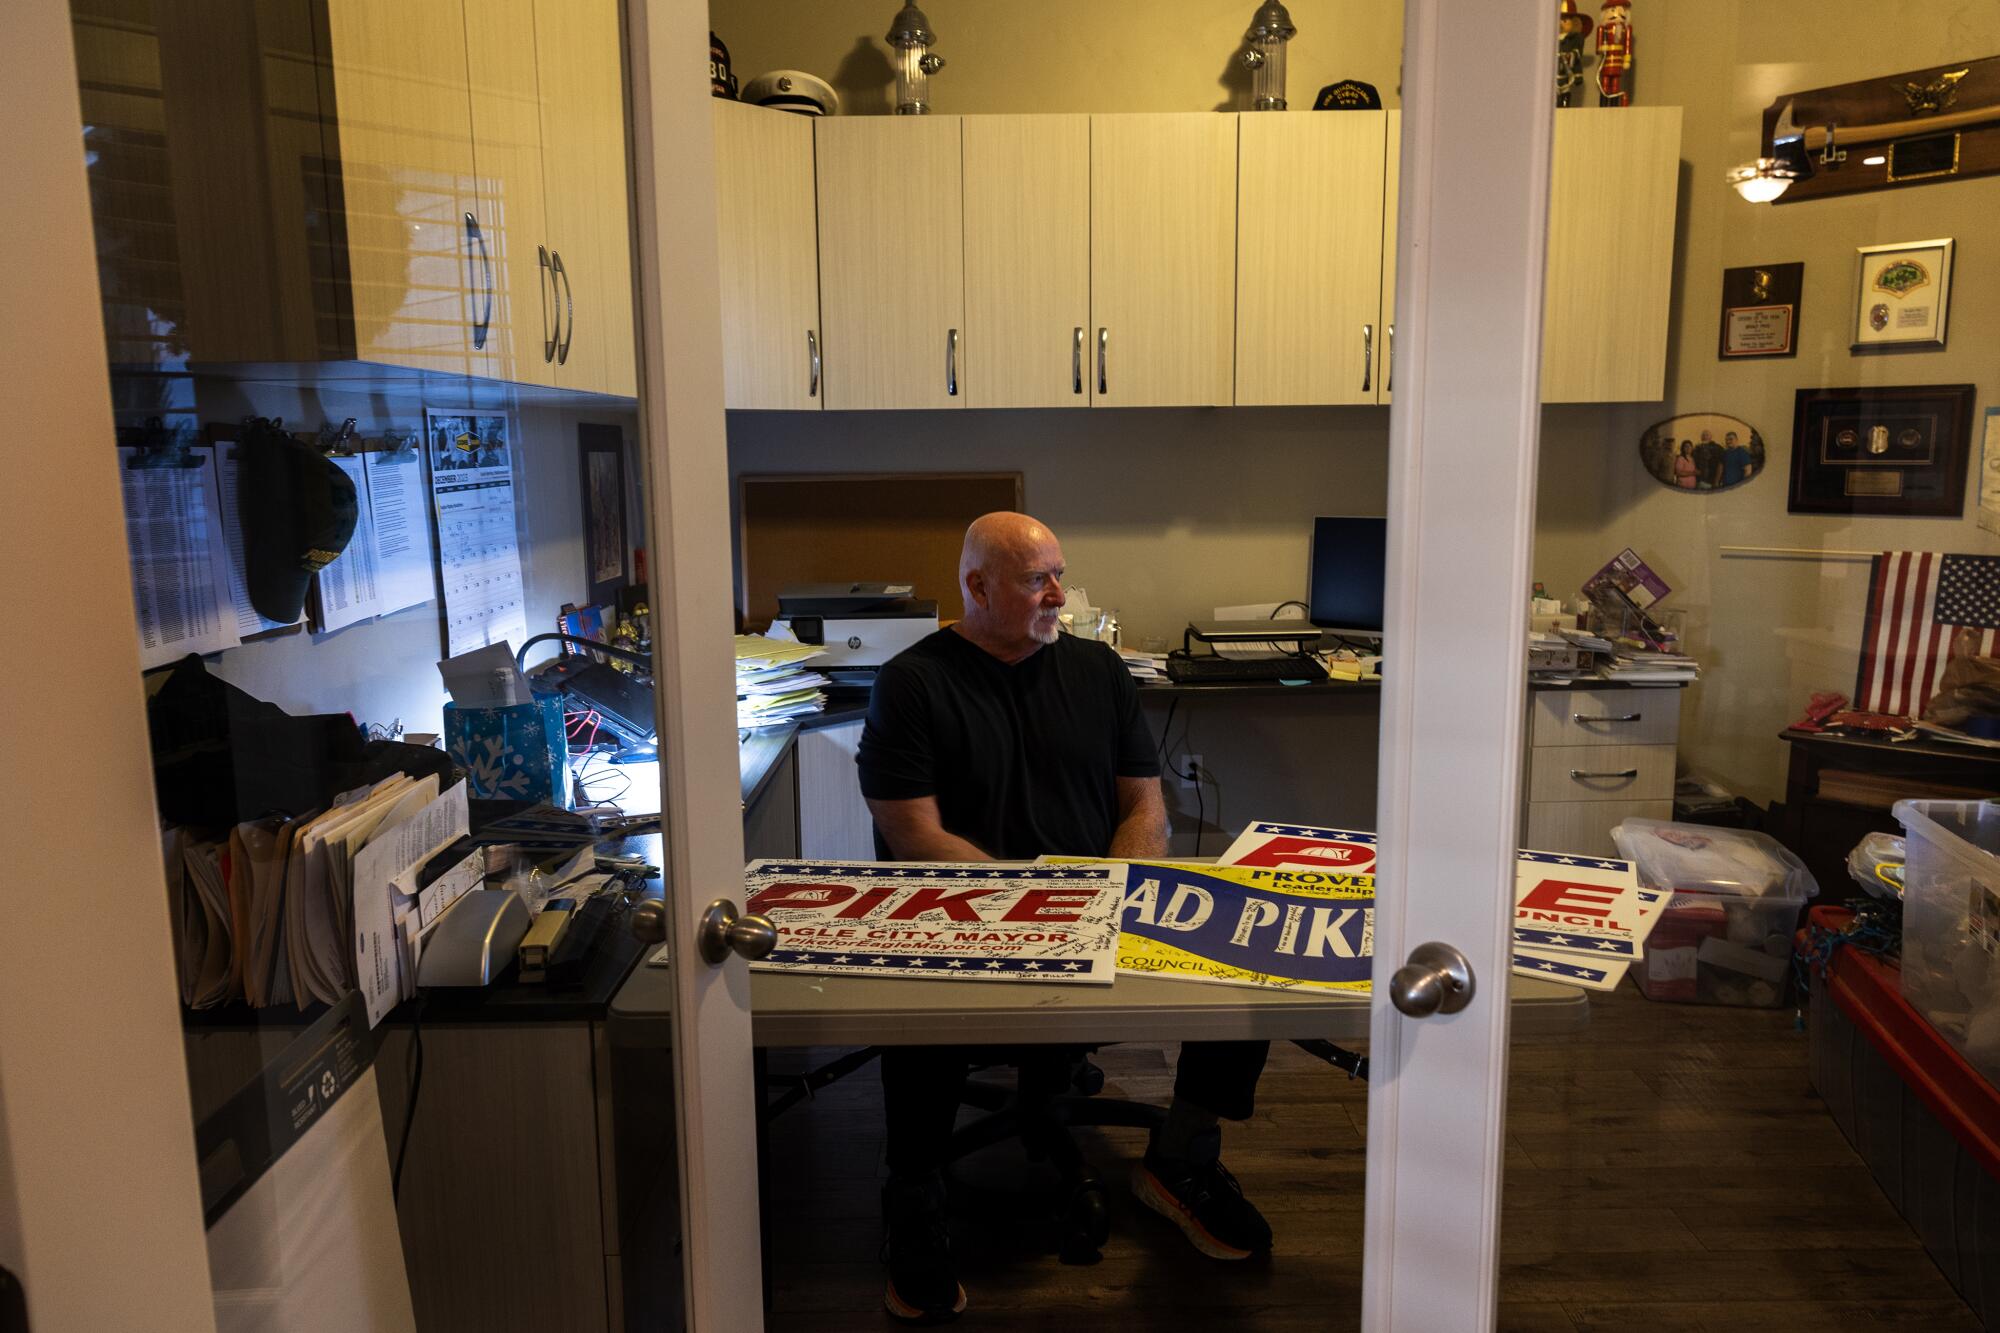 Brad Pike spends time in his home office the day after being elected mayor on Dec. 6 in Eagle, Idaho.